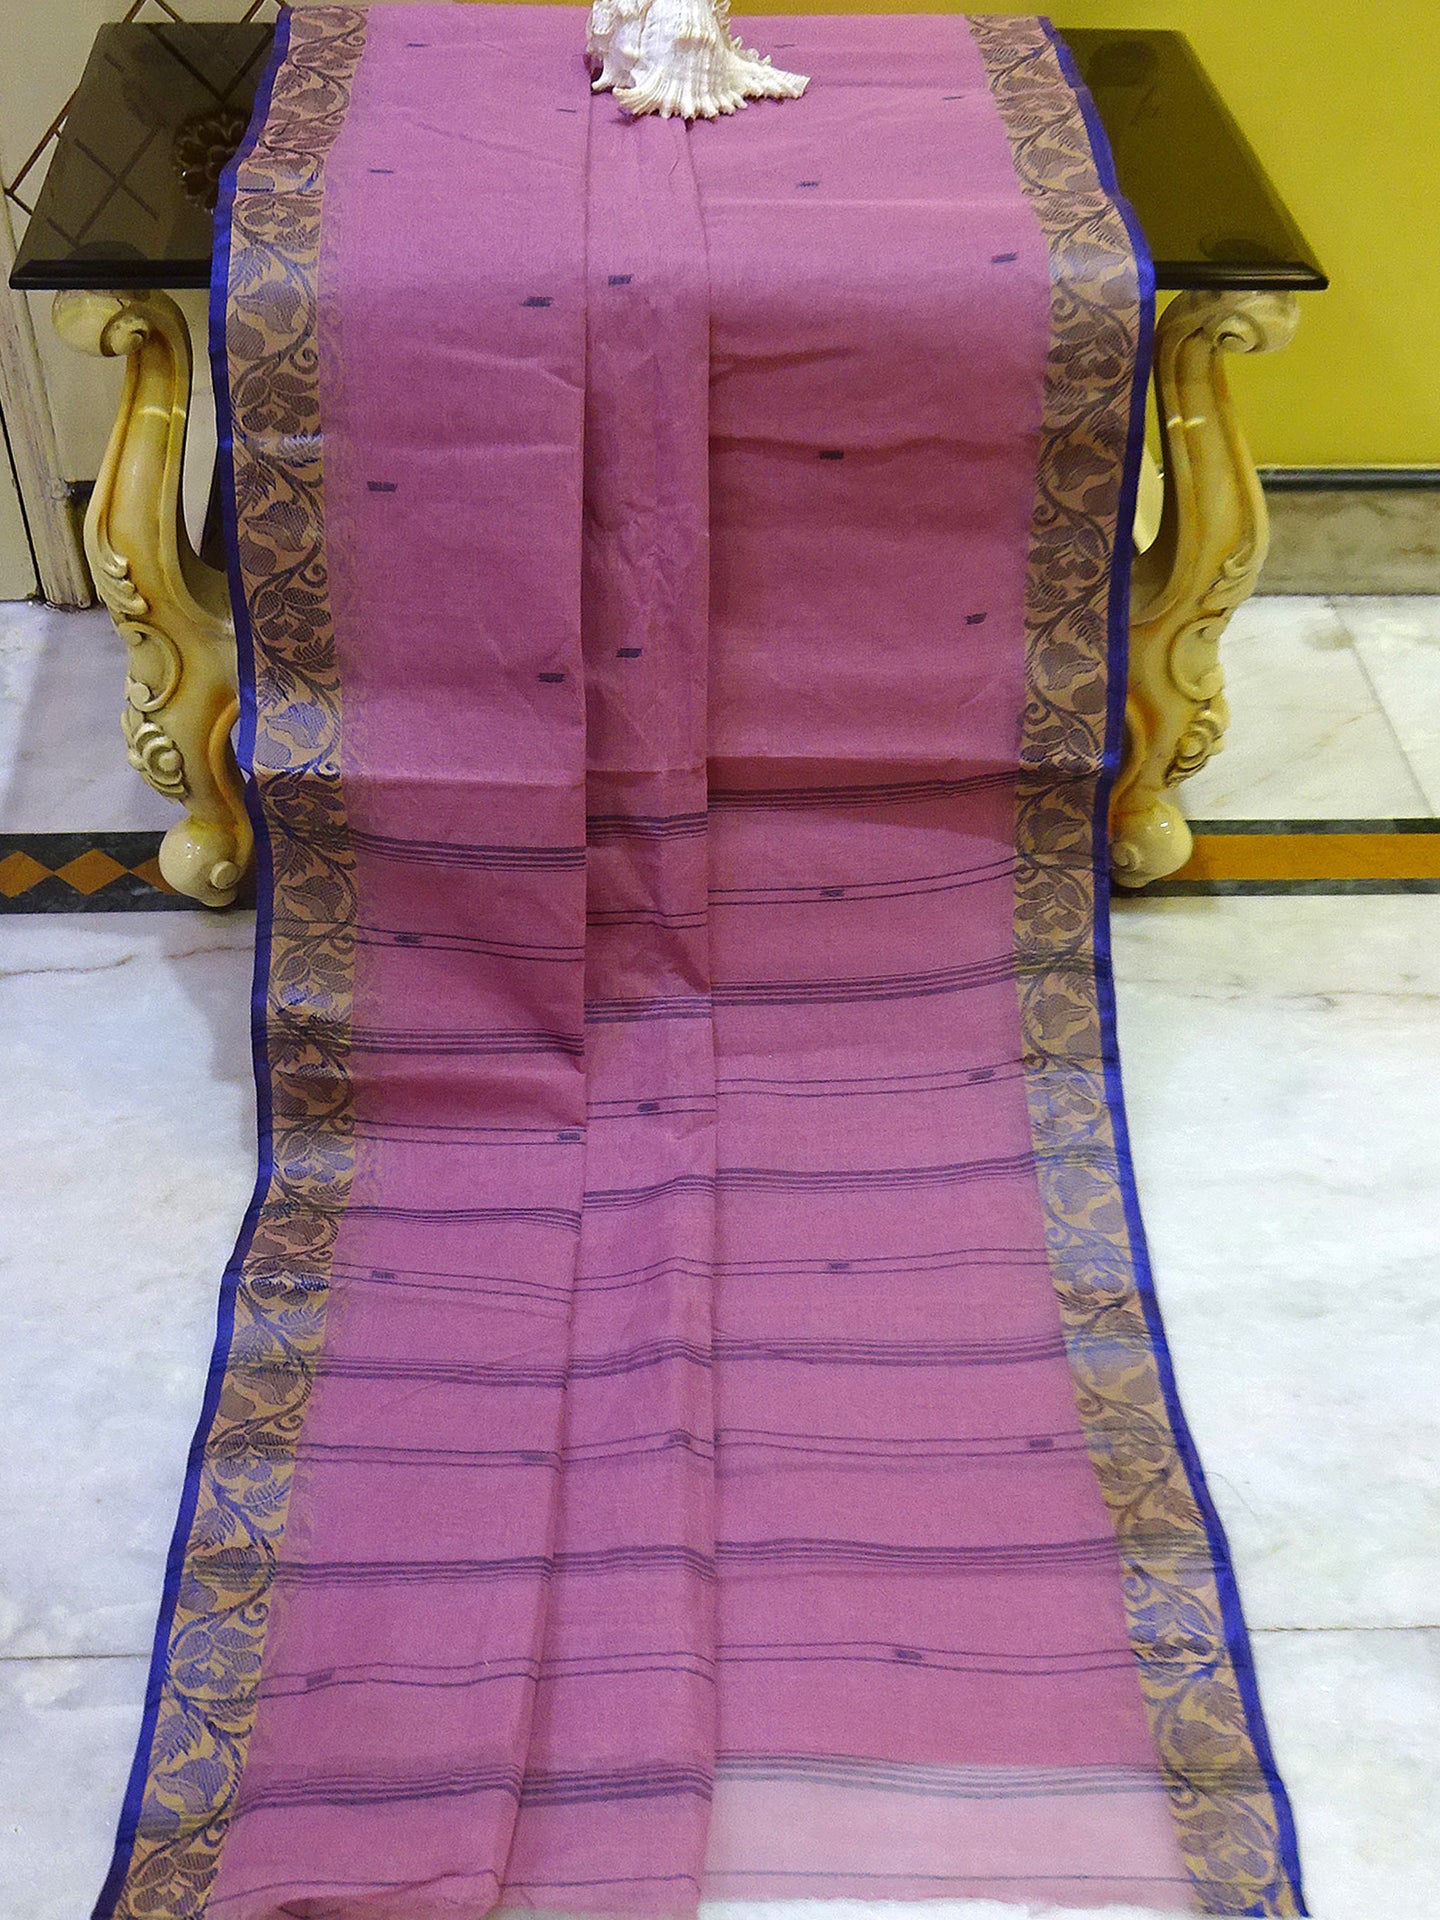 Woven Floral Nakshi Motif Border Work Bengal Handloom Cotton Saree in Thulian Pink, Beige and Navy Blue